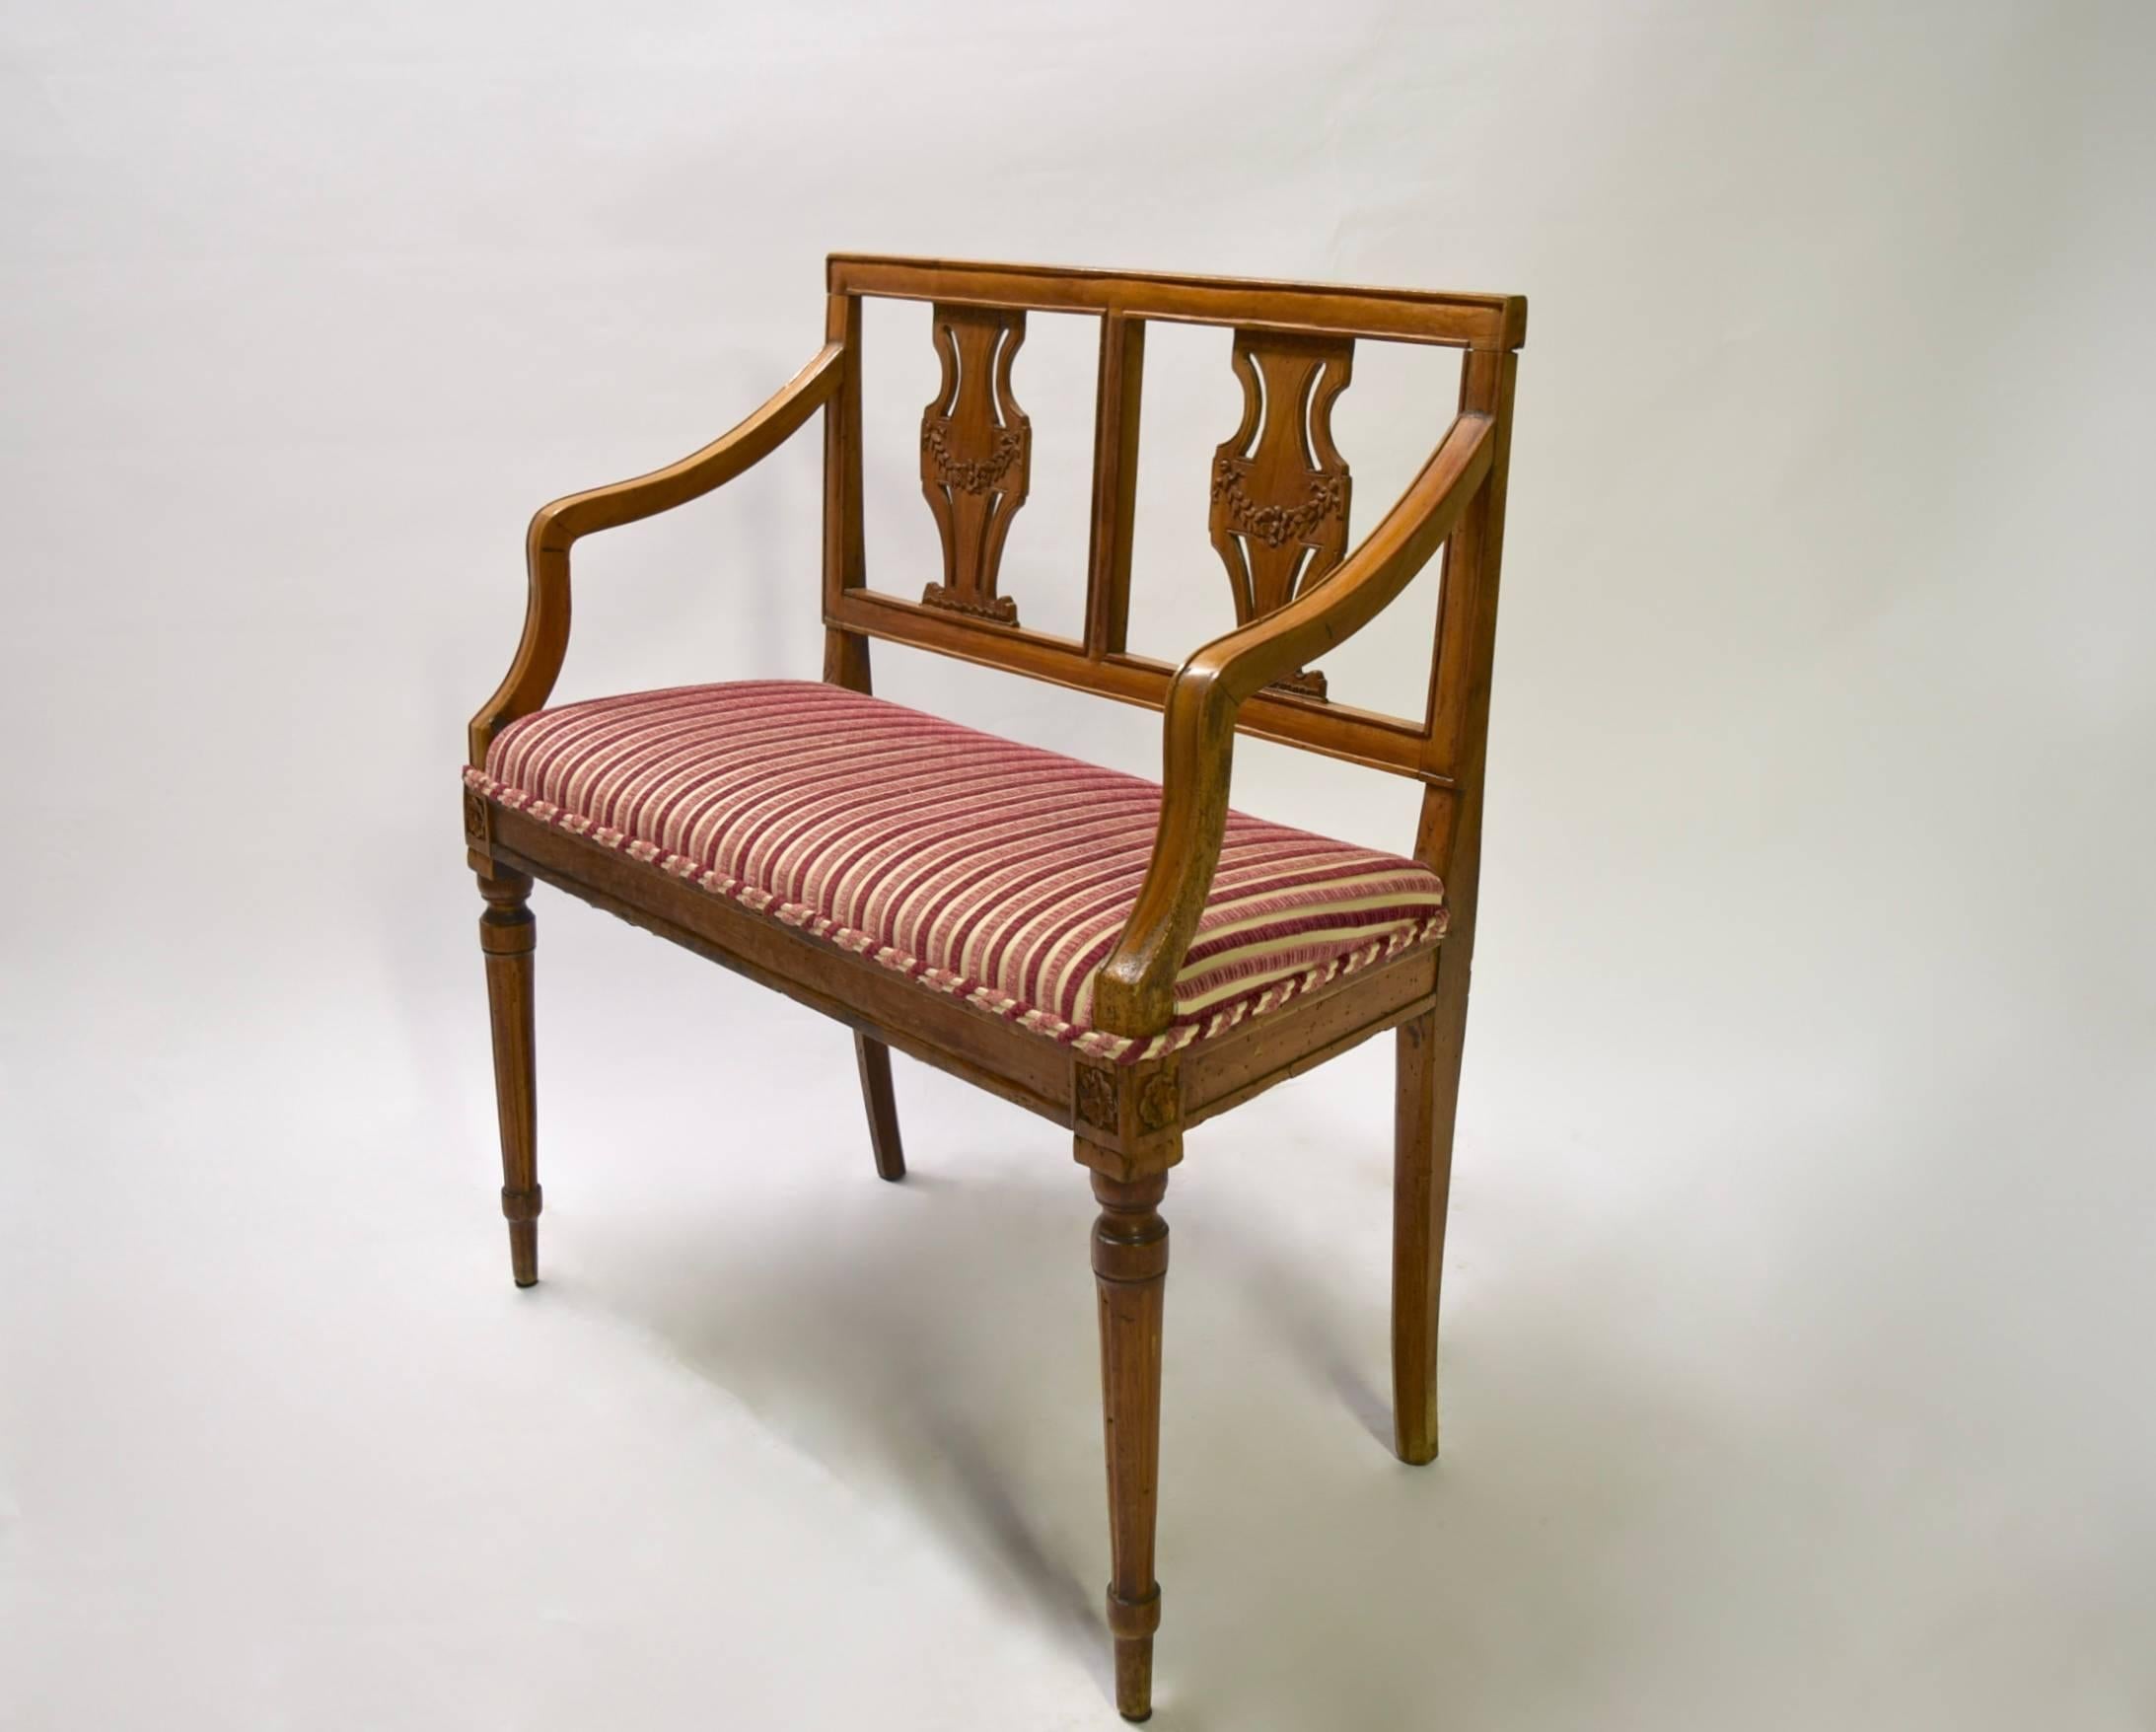 Settee has a mahogany frame with tapered hand front legs with hand-carved decorative flowers on each leg and the seat back. The cushion is upholstered in a modern striped fabric.